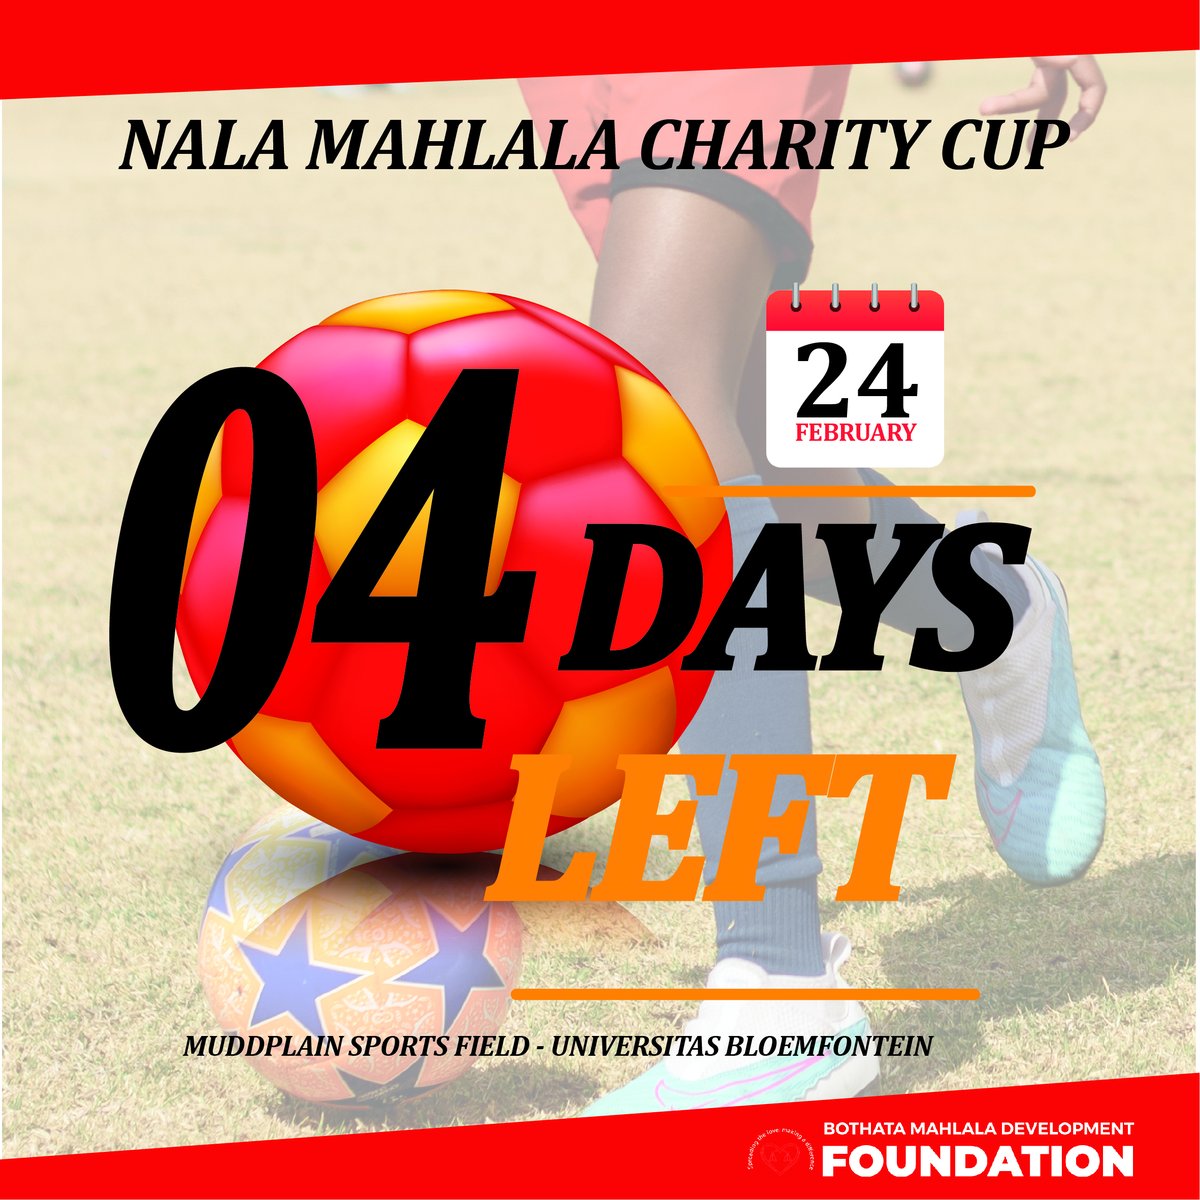 4 days left until the Charity Cup Soccer Tournament kicks off, . ⚽️📷 #CharityCupCountdown #sevenaside #Nalacharitycup #bmdfoundation #footballculture #supportcharities #CharityEvent2024